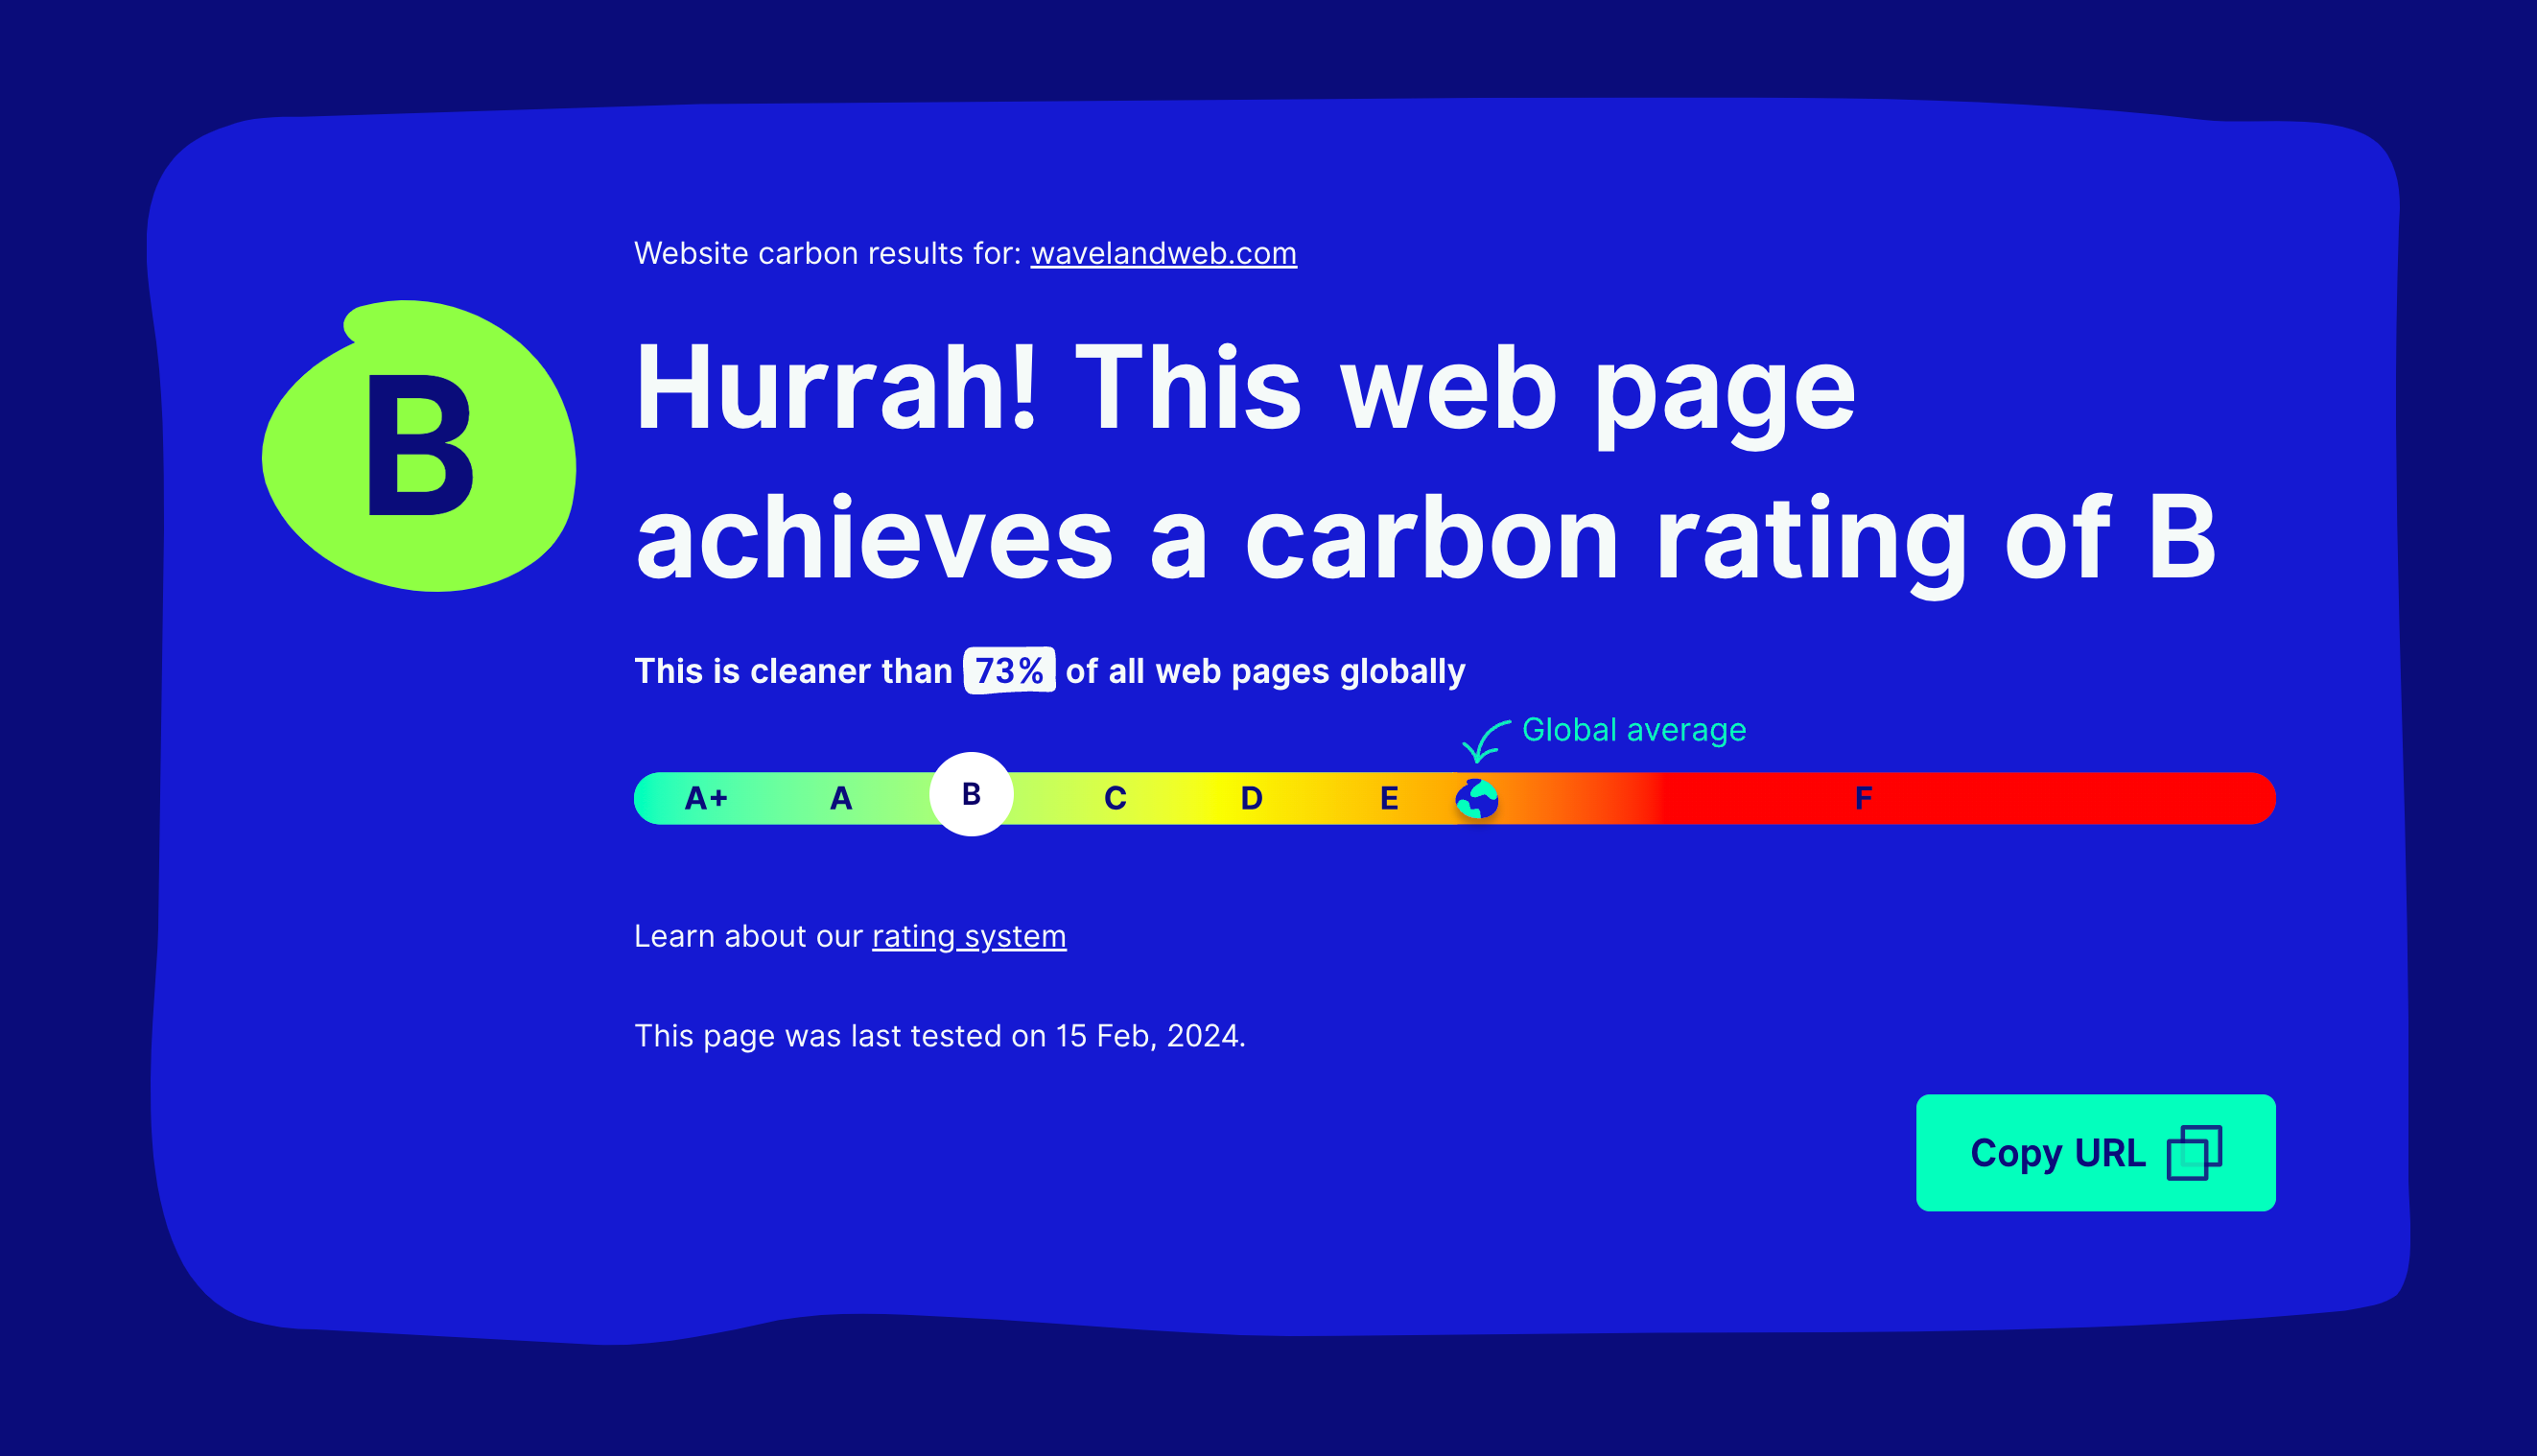 A screenshot of the Website Carbon Calculator showing the carbon emissions of the wavelandweb.com website.